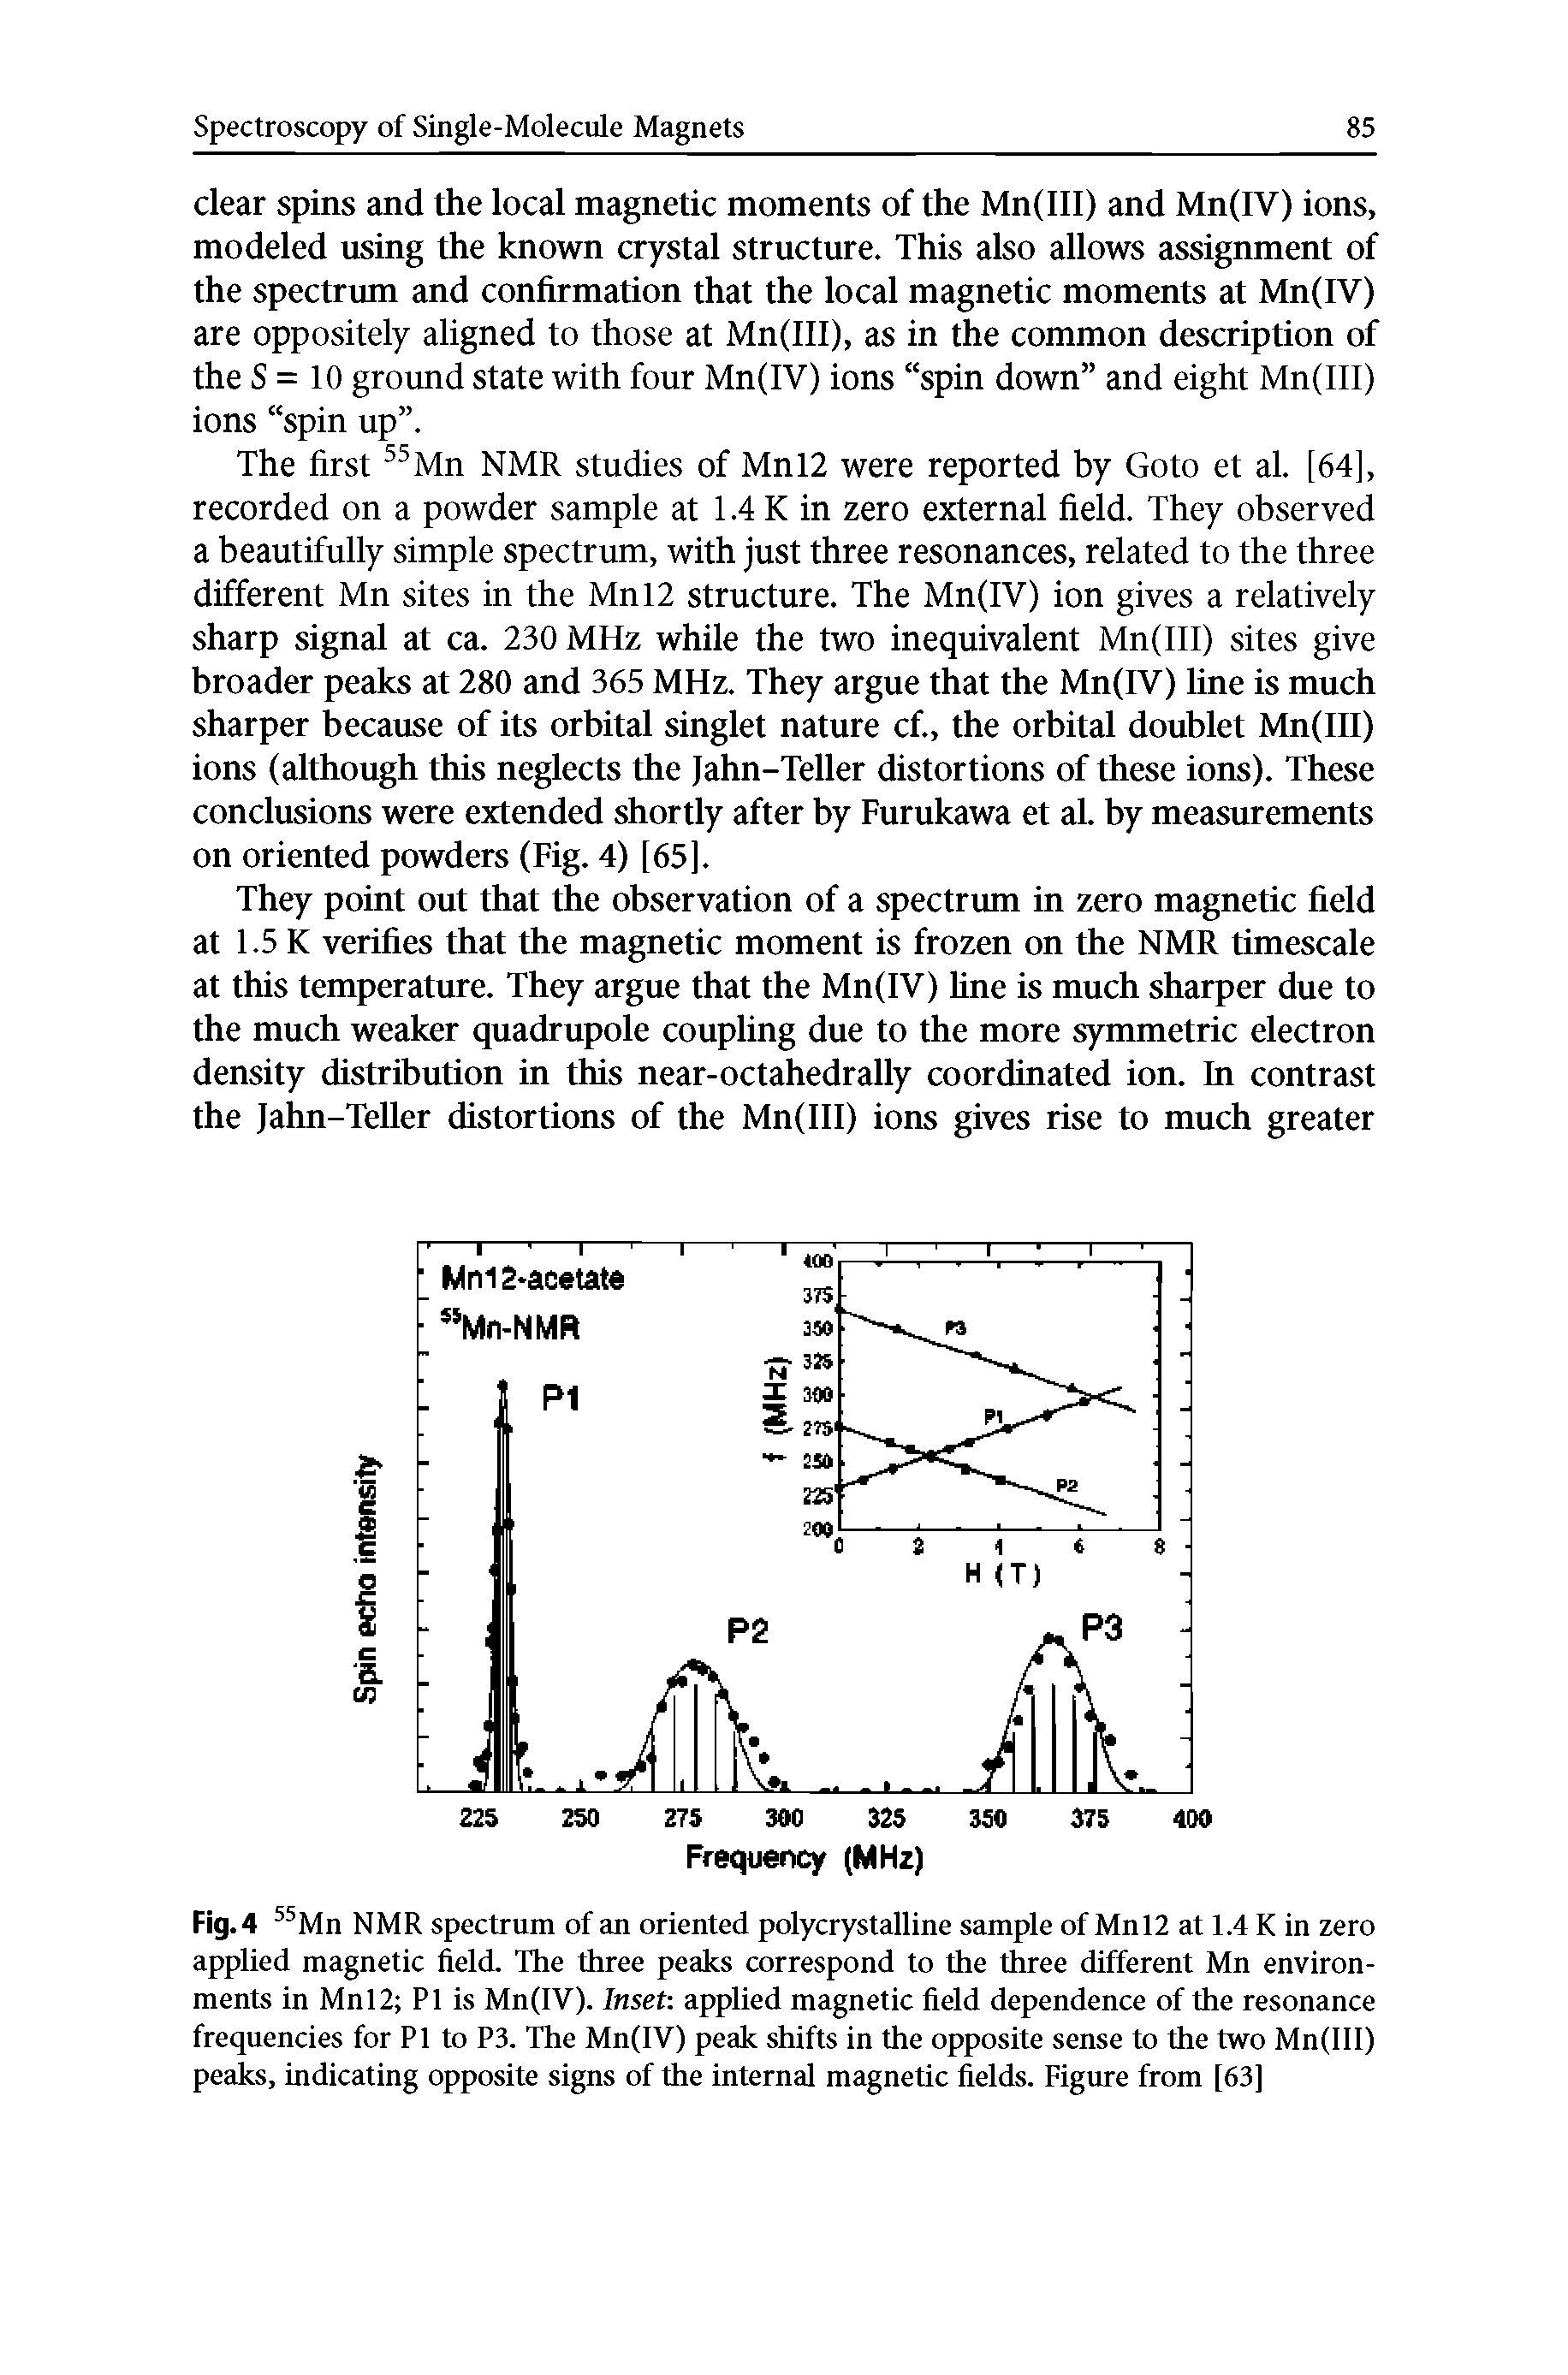 Fig. 4 Mn NMR spectrum of an oriented pofycrystalline sampfe of Mnl2 at 1.4 K in zero applied magnetic field. The three peaks correspond to the three different Mn environments in Mnl2 PI is Mn(IV). Inset applied magnetic field dependence of the resonance frequencies for PI to P3. The Mn(IV) peak shifts in the opposite sense to the two Mn(III) peaks, indicating opposite signs of the internal magnetic fields. Figiu e from [63]...